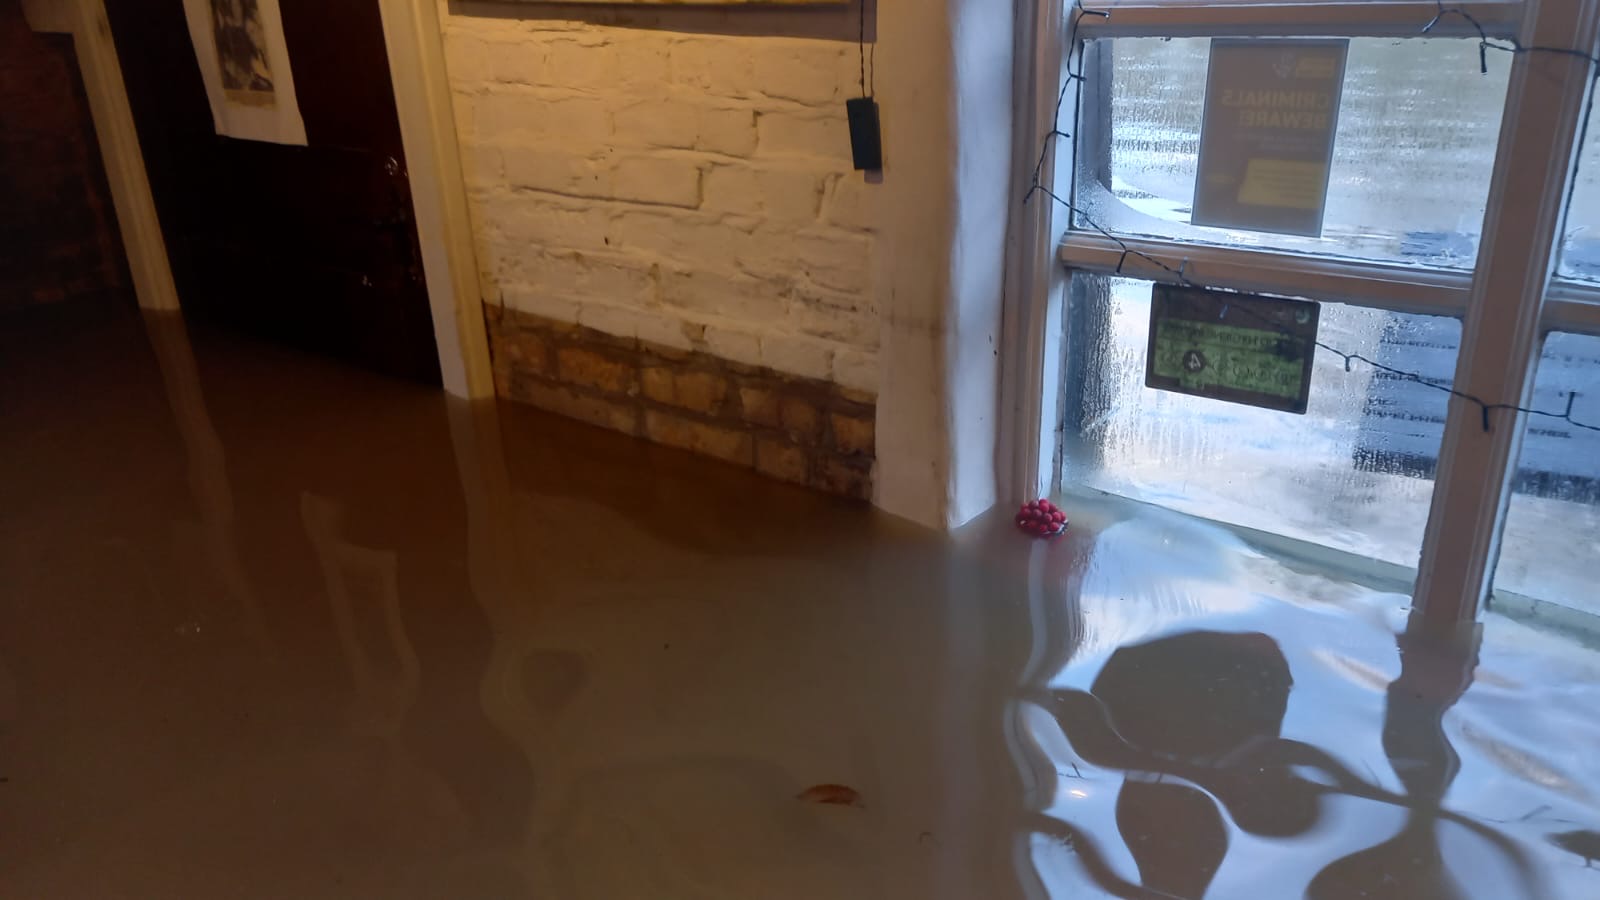 Inside The Boat Inn with flood water reaching the windows 